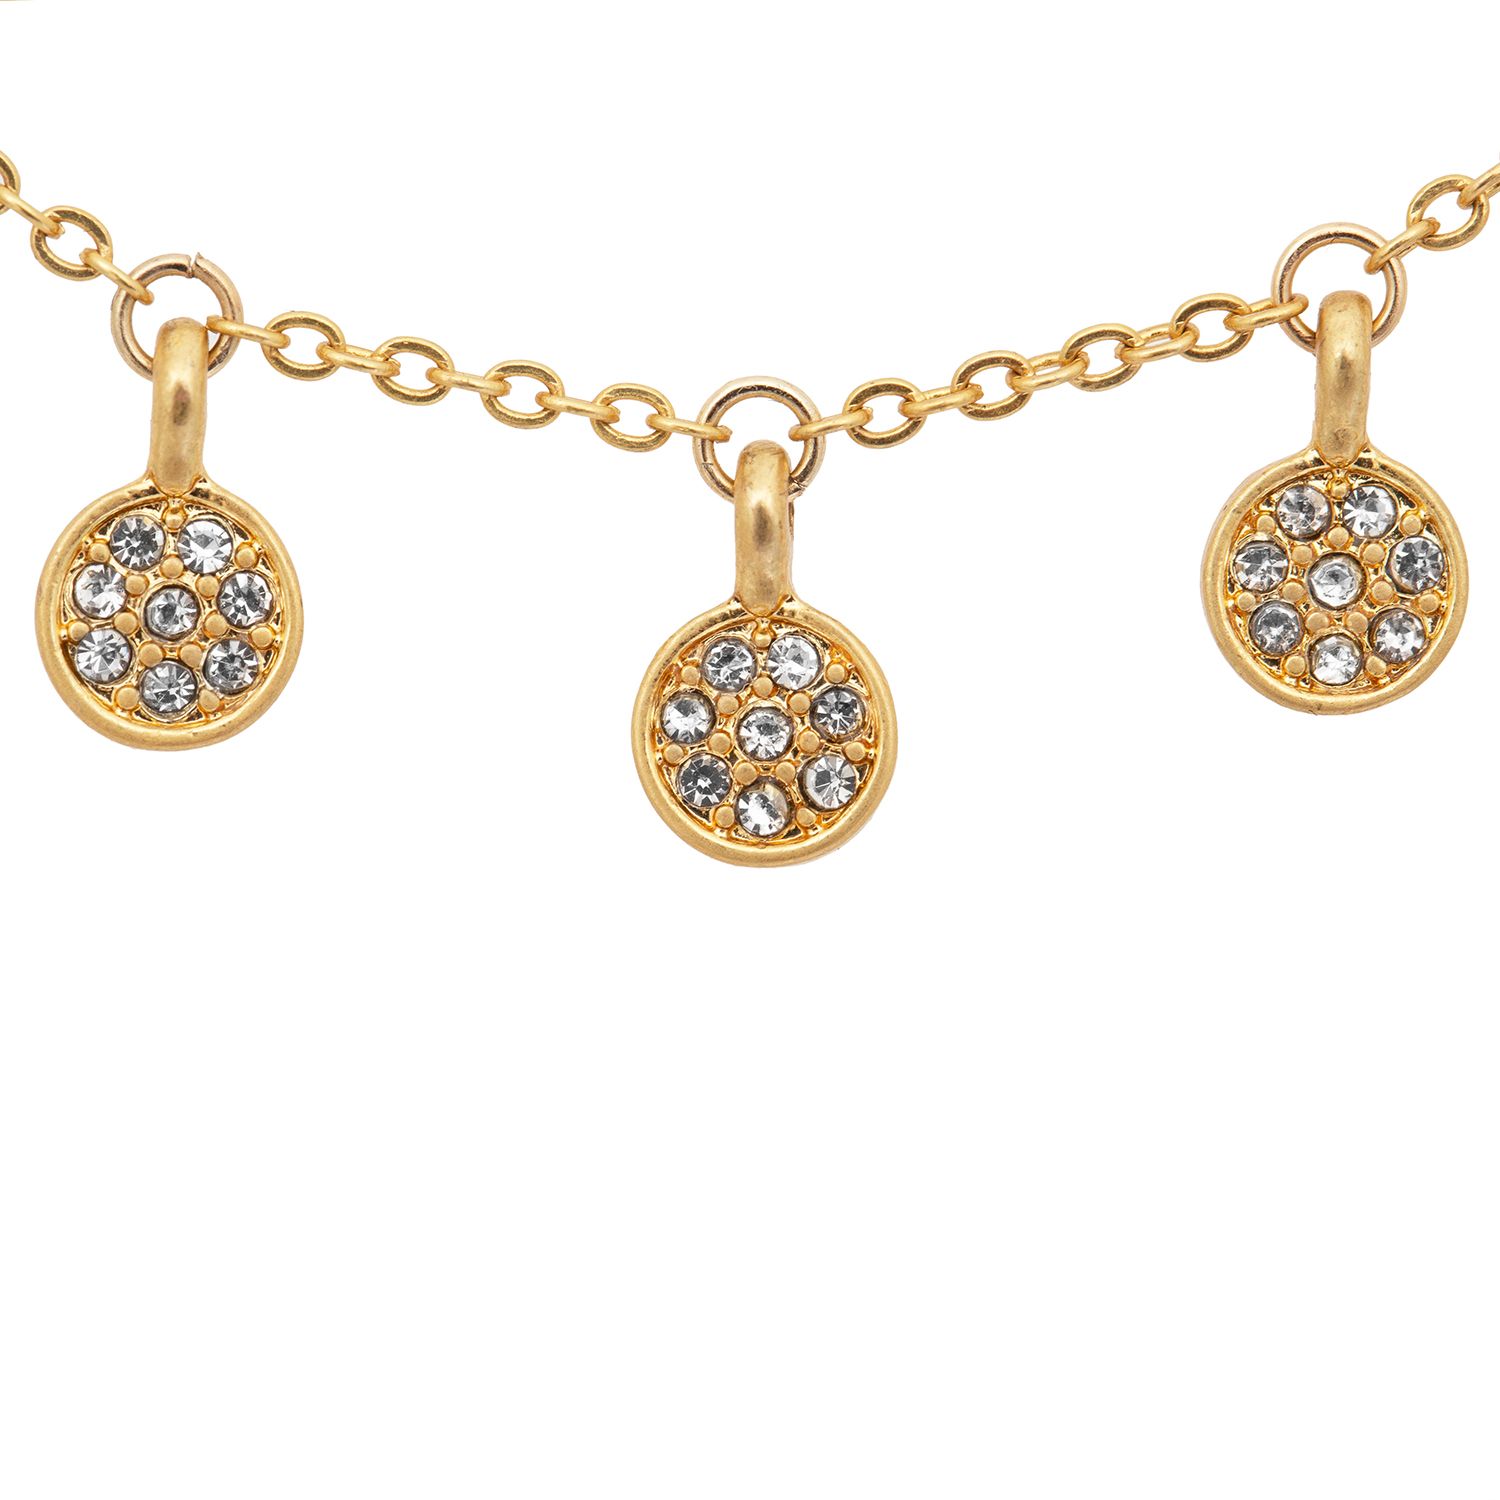 If you love your boho jewellery with a sparkly twist, this choker necklace has your name all over it! It features a dainty gold choker with miniature coins that dance across your neck. The gold plated necklace features pavé detailing with sparkling clear stones and it's perfect for layering with another longer necklace with a low neckline outfit, or over the top of a jumper during the day! It measures 15 inches and comes with a 3 inch extender. The Boho pave choker necklace is designed as a laid back piece with a glamorous twist that you can wear with so many looks!